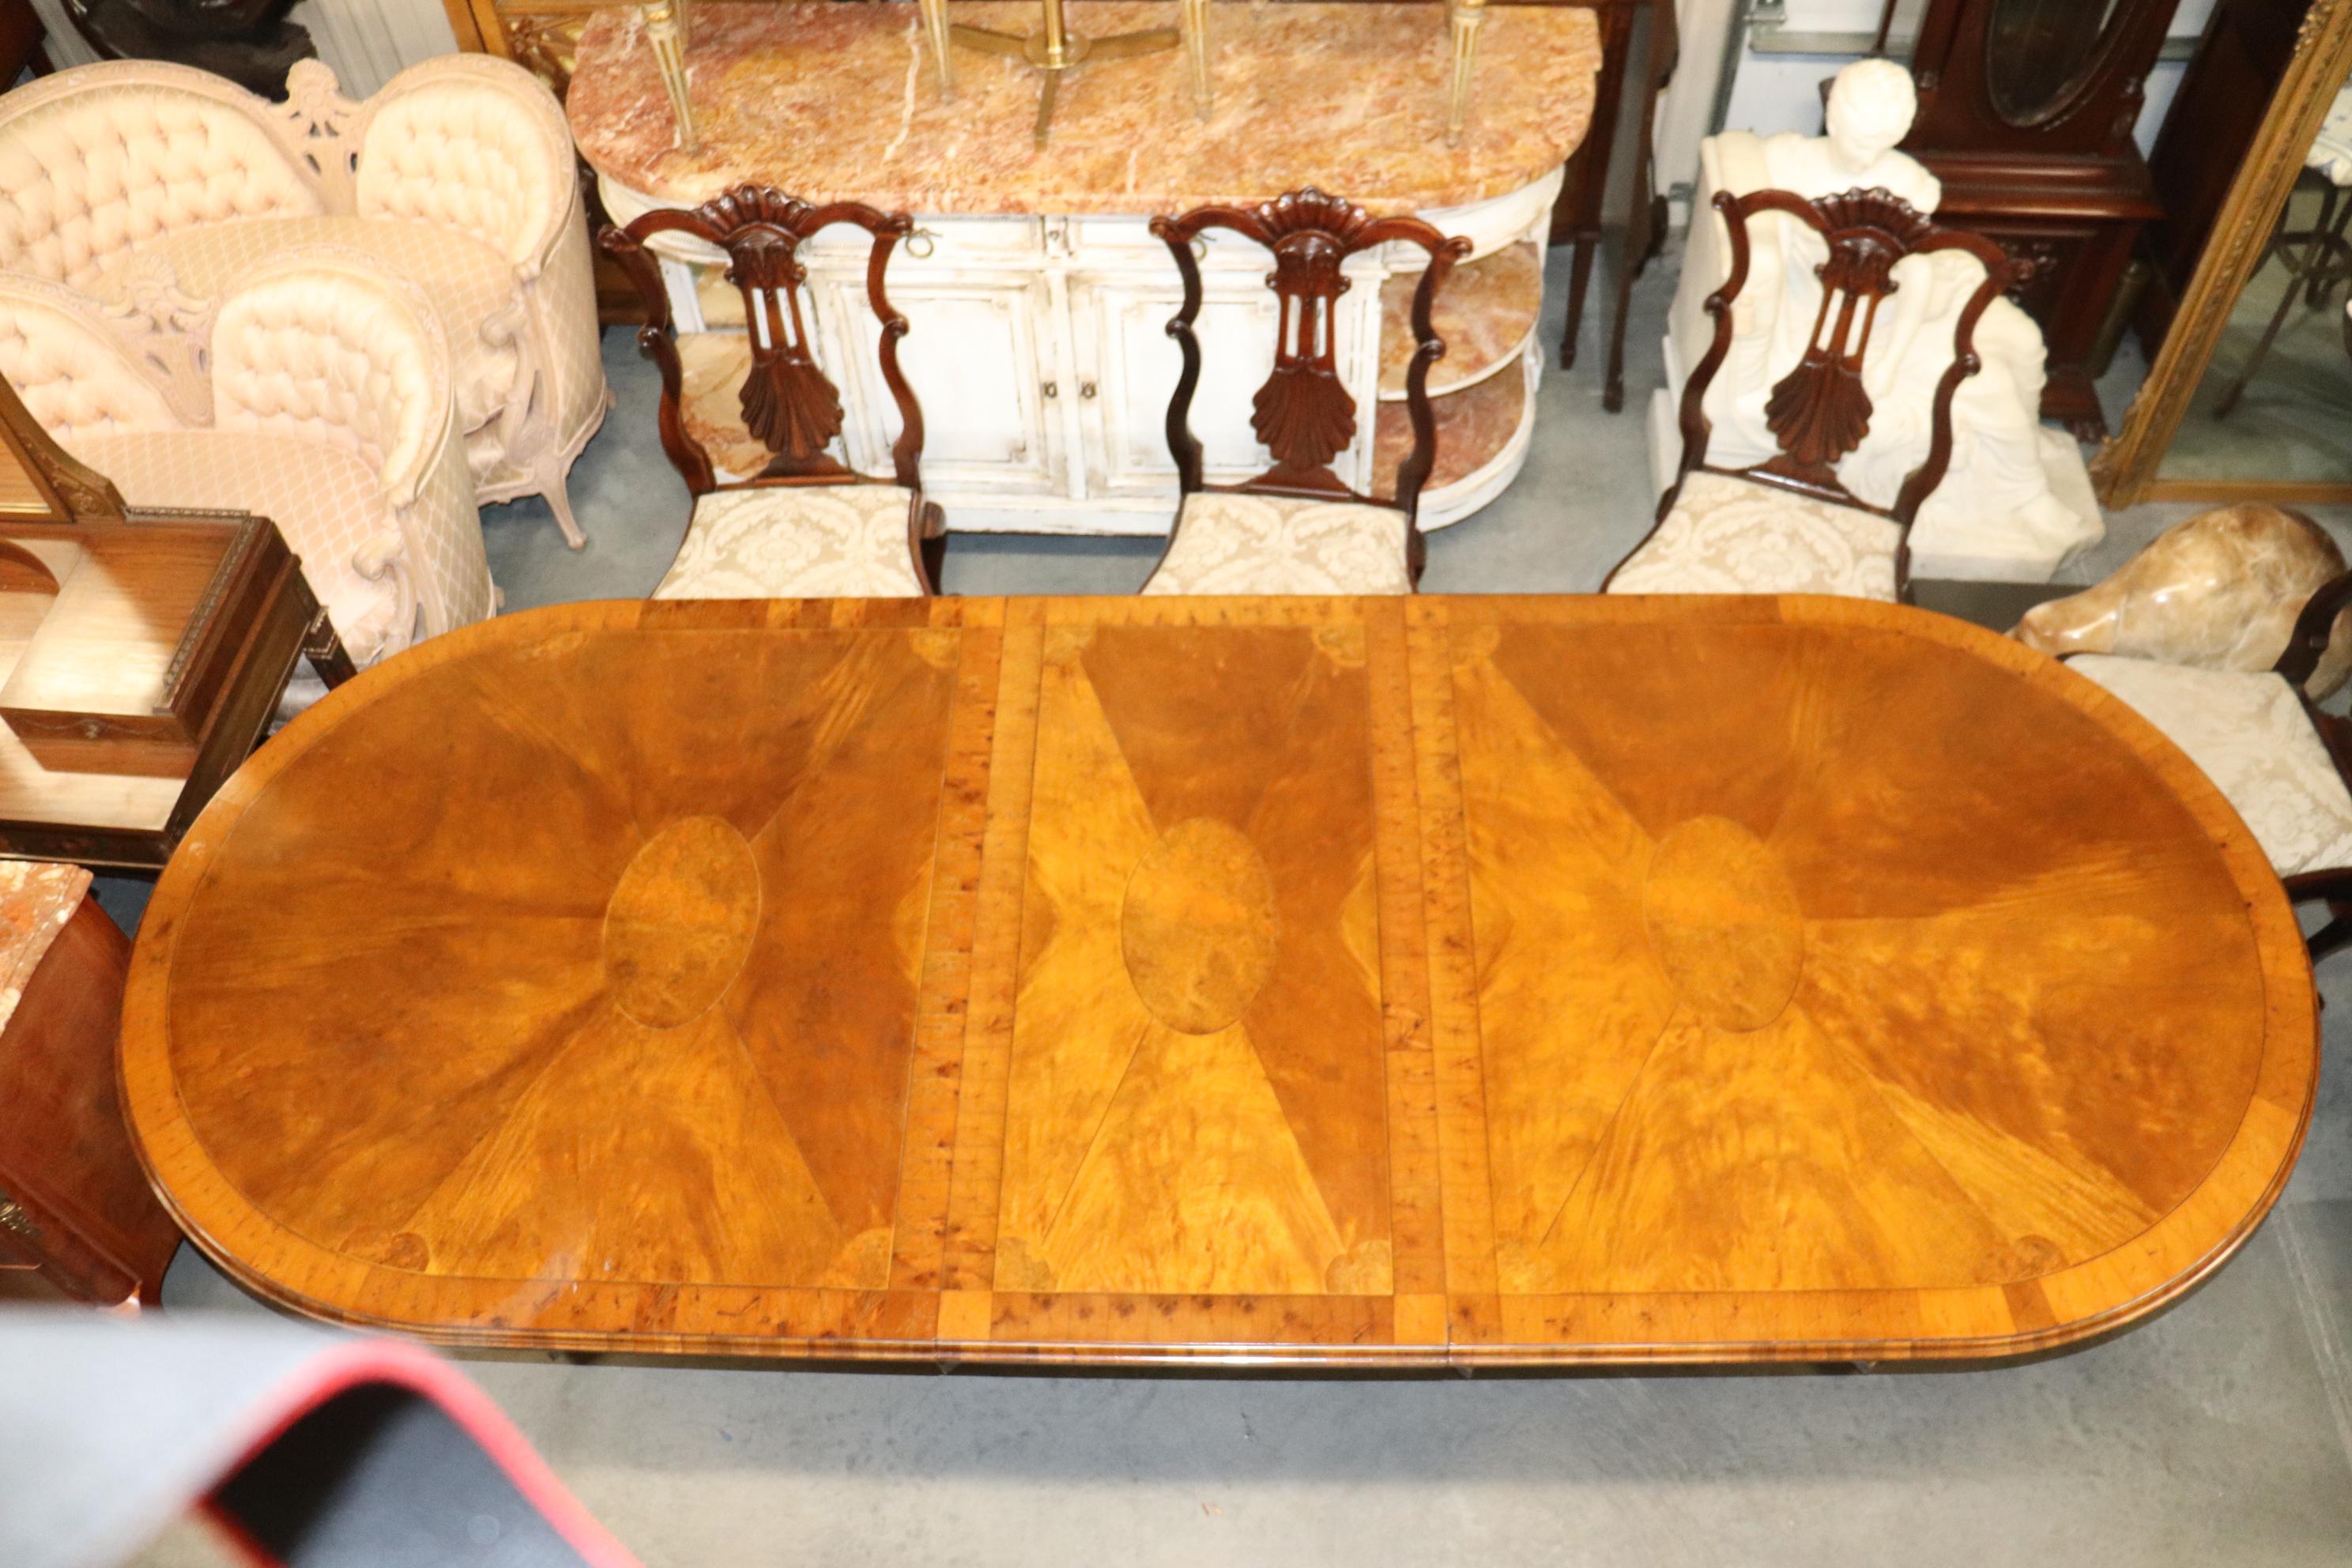 This gorgeous oyster burled dining table with two leaves and beautiful brass adorned legs. The table is in its original finish and has only the most minor imperfections from age and use. This is a custo-made hand-made table from England and measures